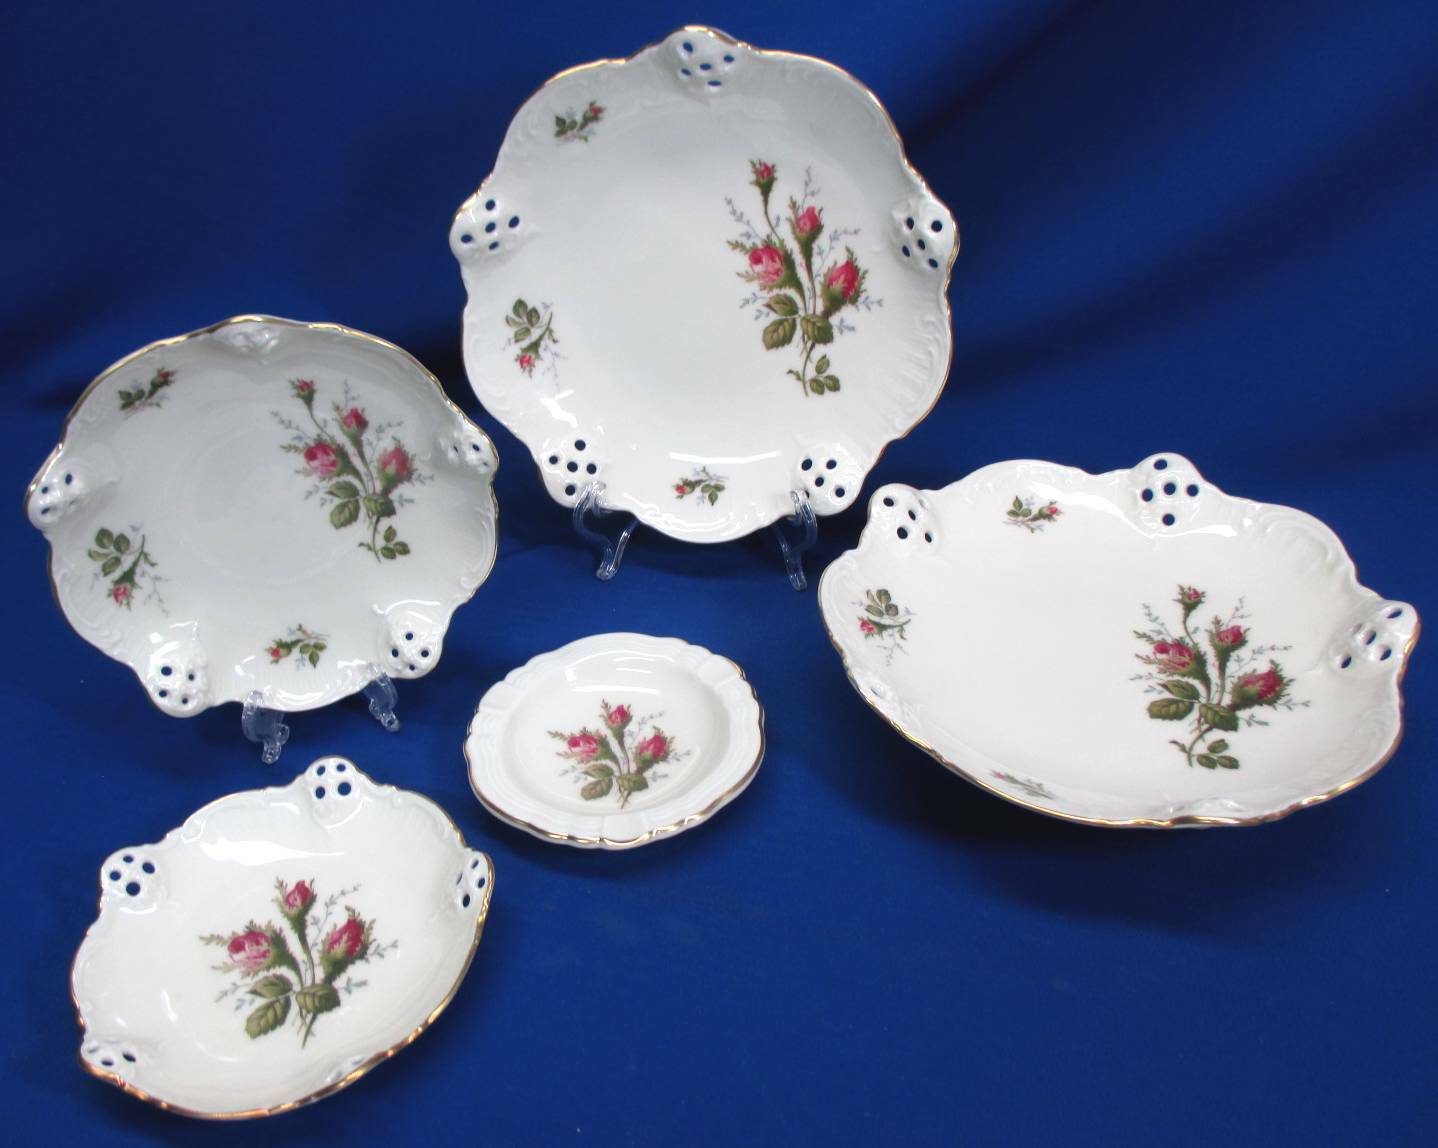 5 PIECES ROSENTHAL MOLIERE, CLASSIC ROSE, MOSS ROSE RETICULATED SERVING PIECES